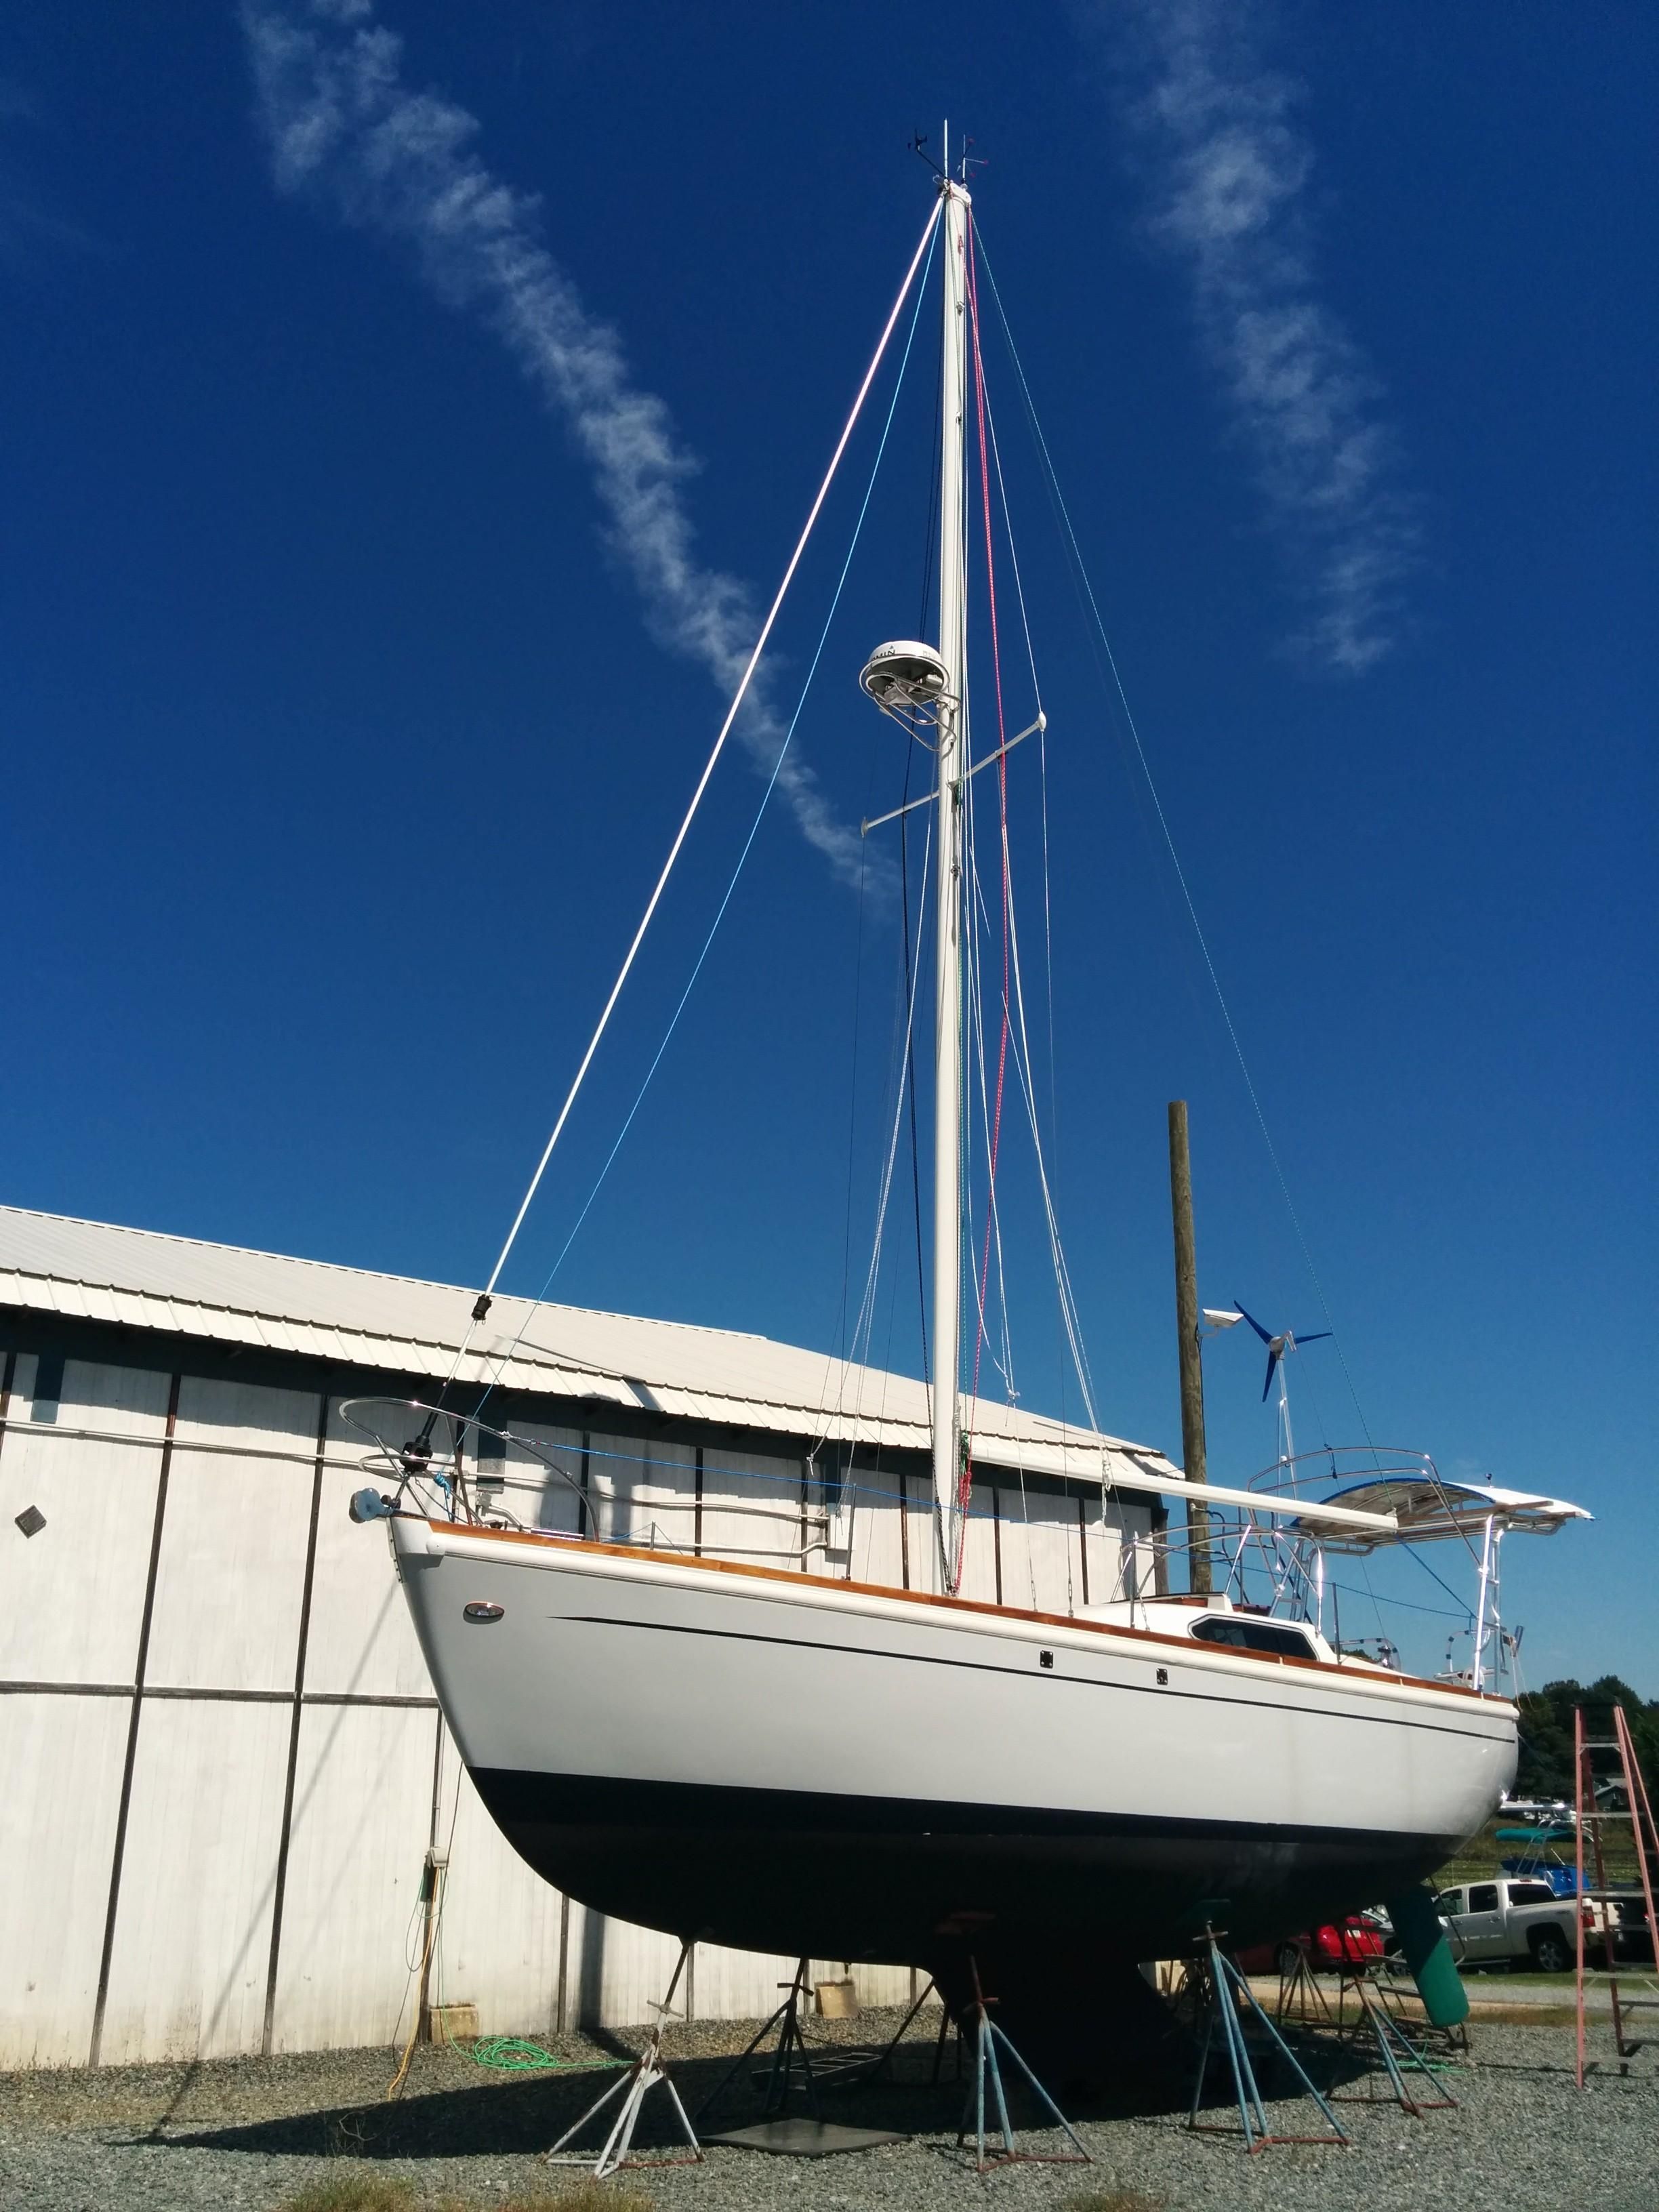 1974 Columbia 34 Sail Boat For Sale - www.yachtworld.com